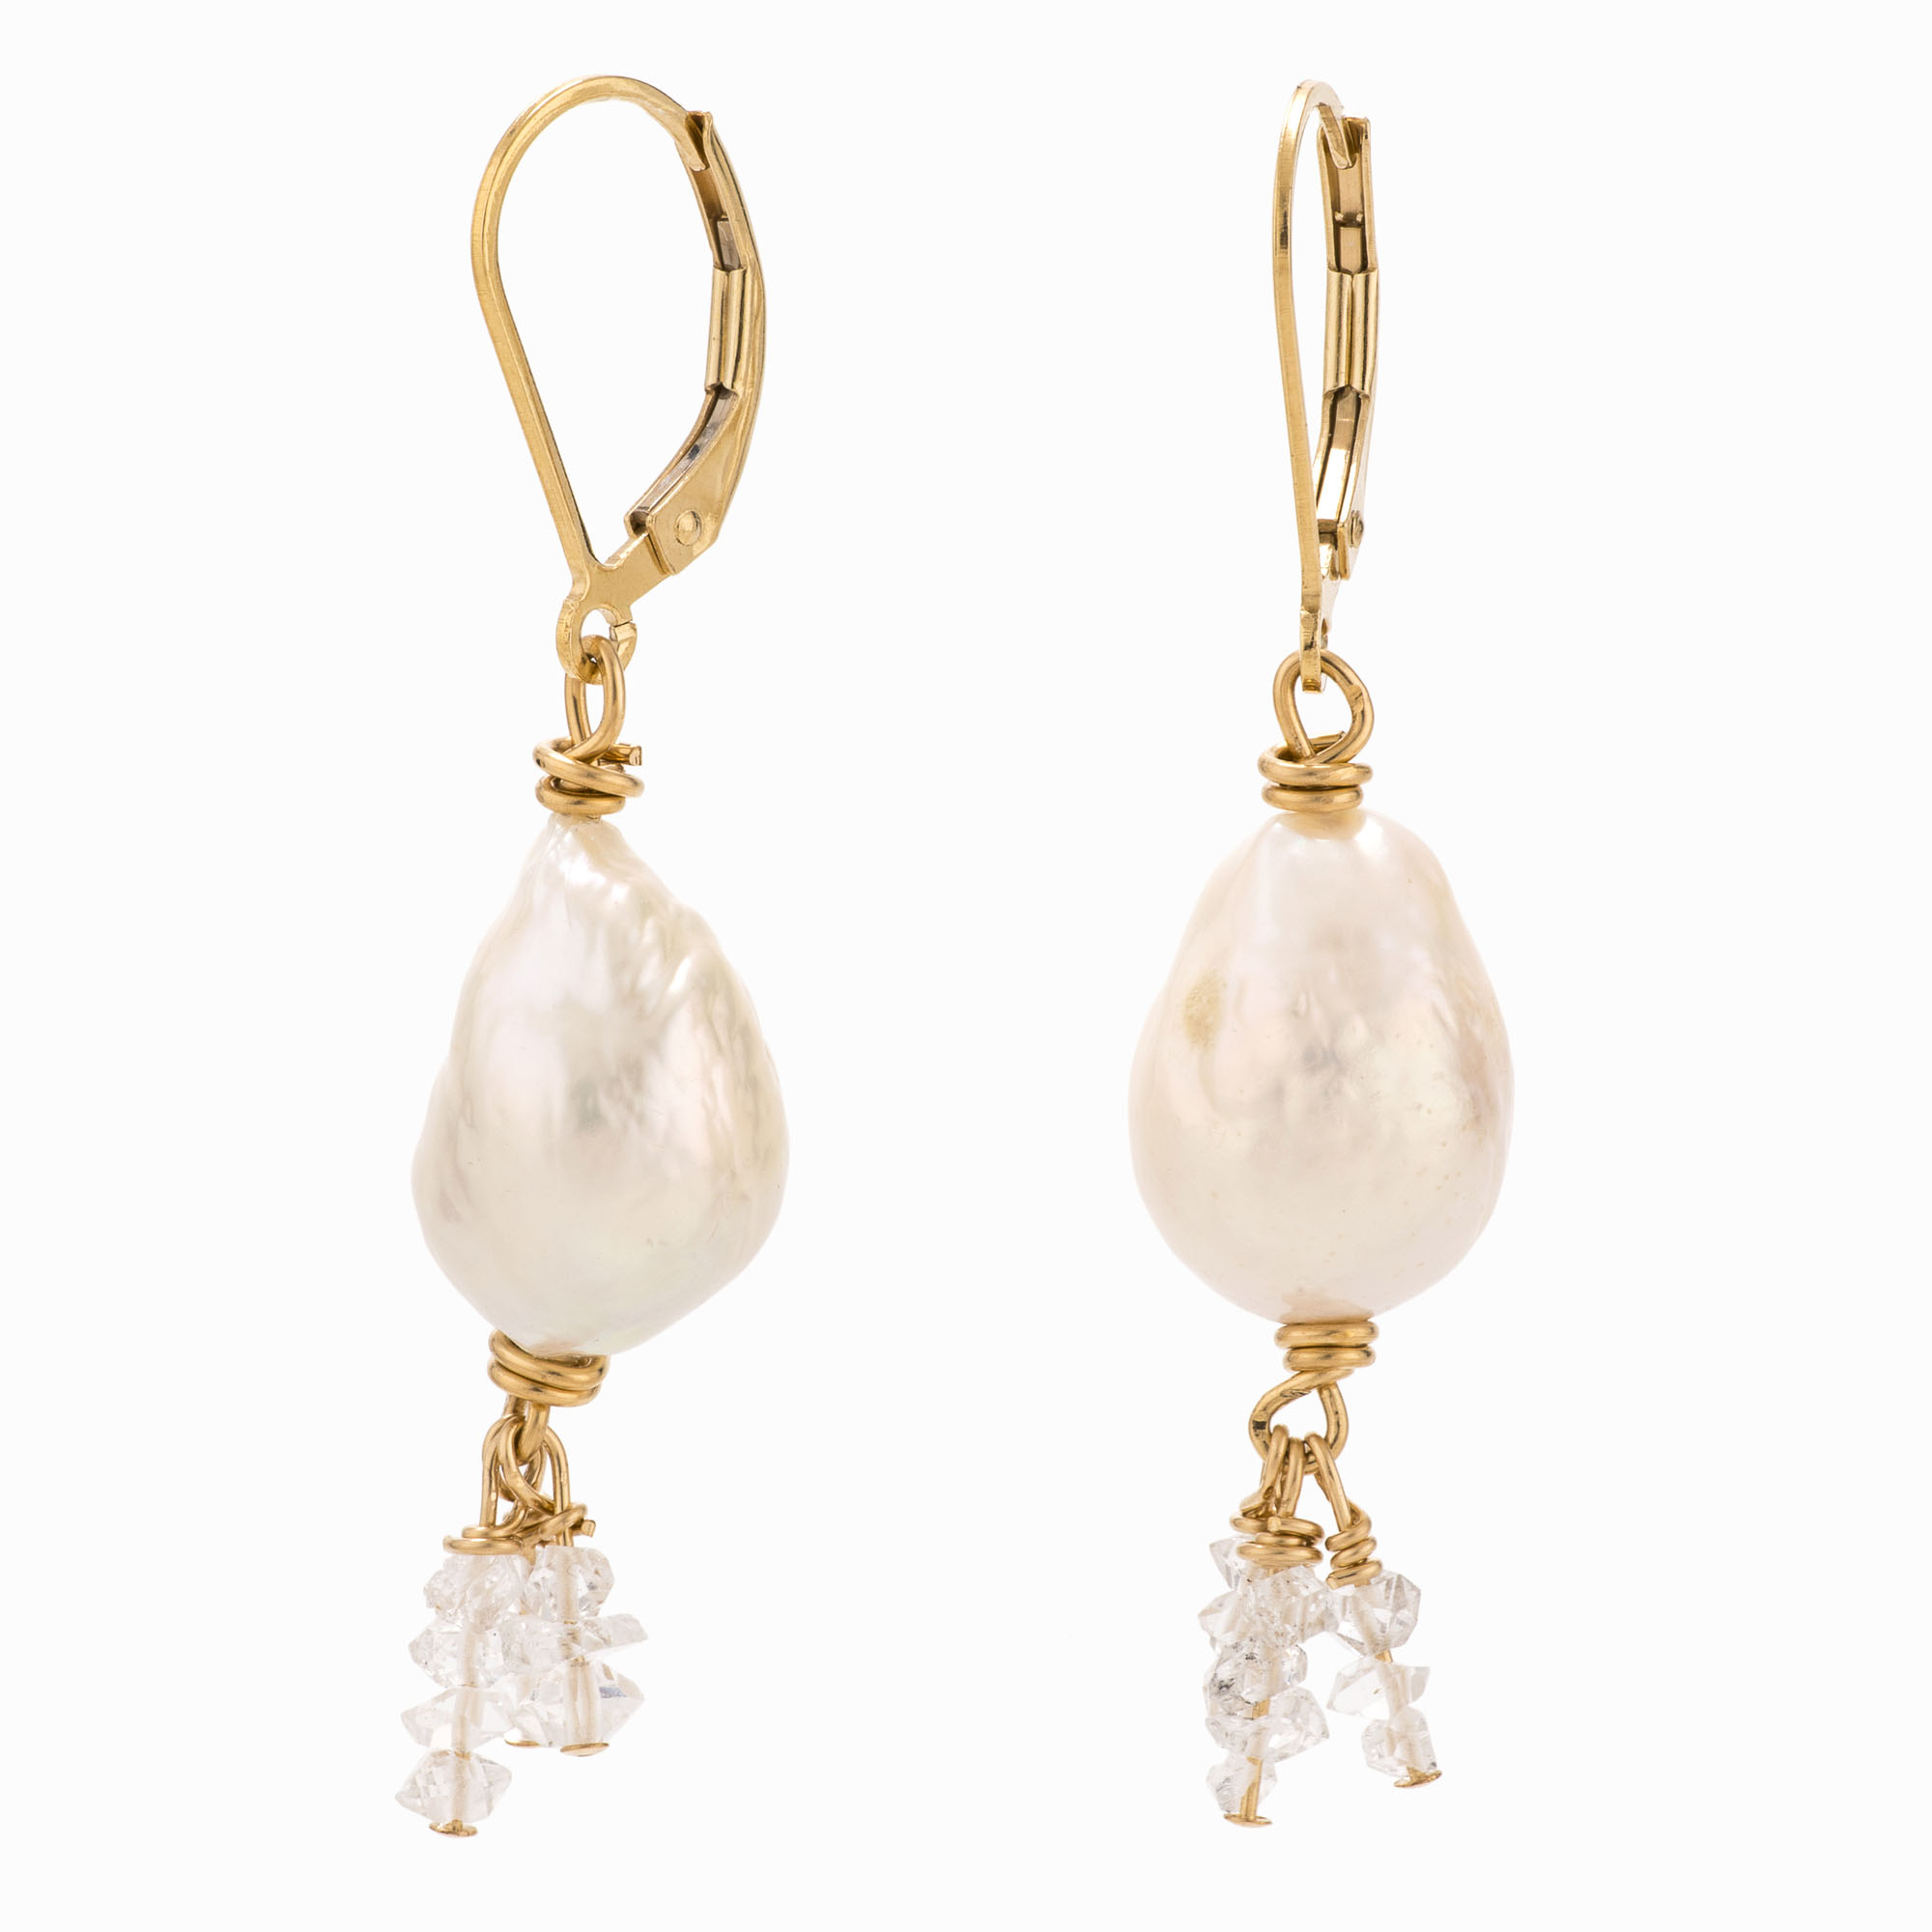 Featured image for “Cordelia Pearl Earrings”